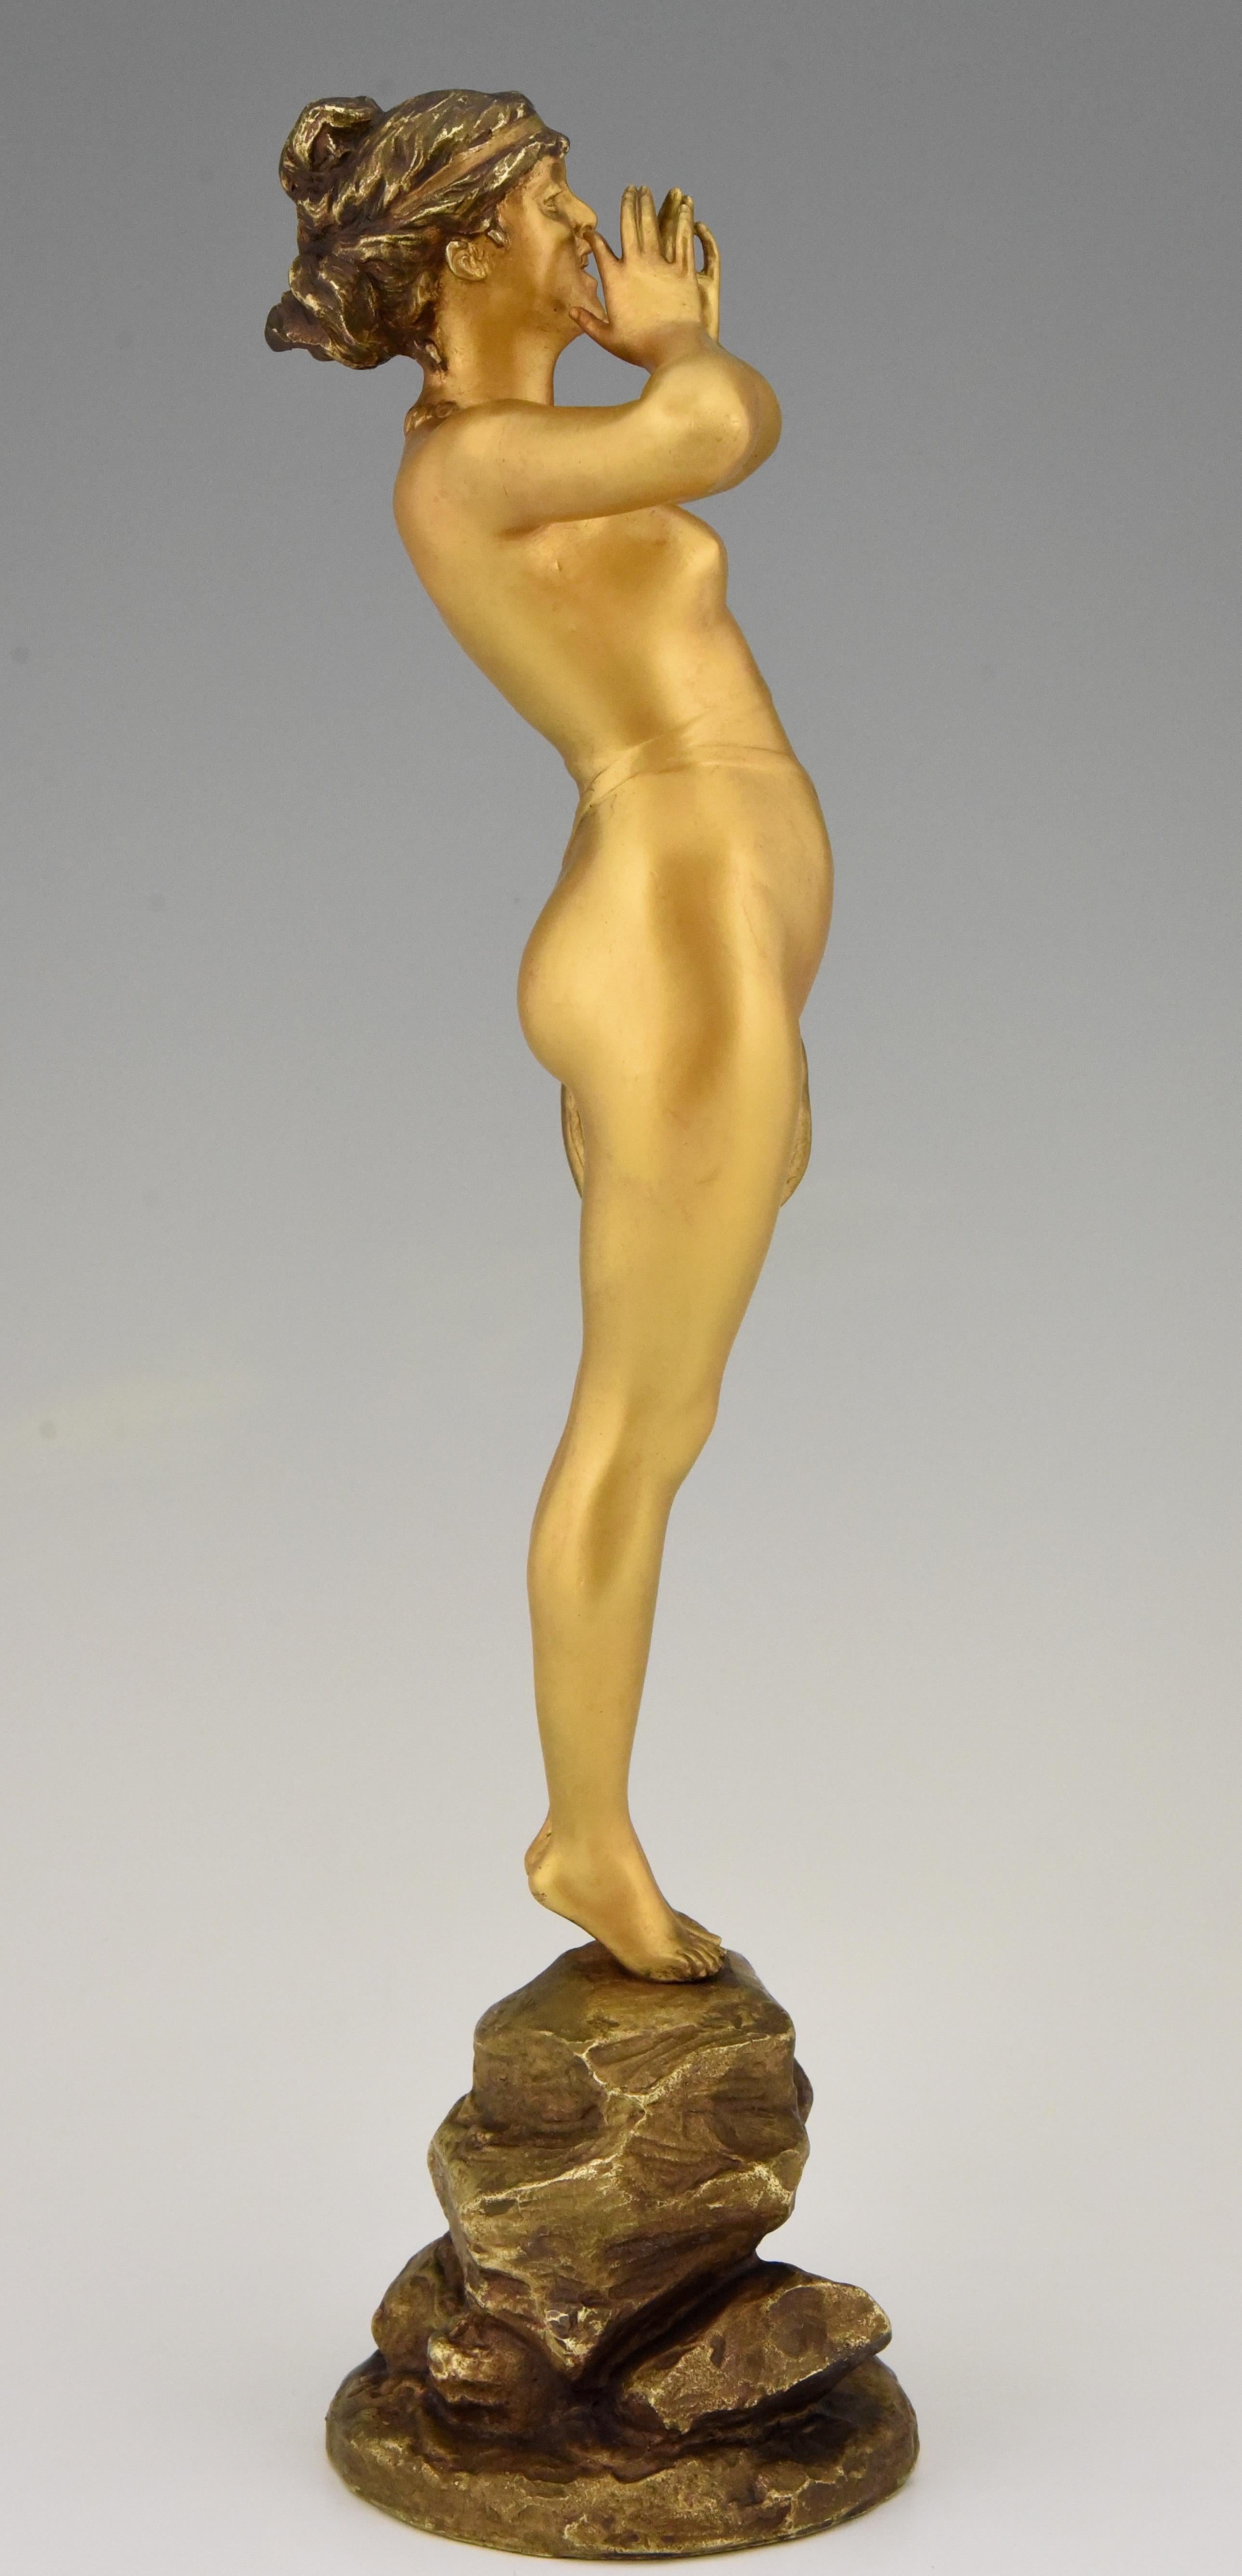 19th Century Art Nouveau Bronze Sculpture Calling Nude Lady Alfred Grevin and Friedrich Beer